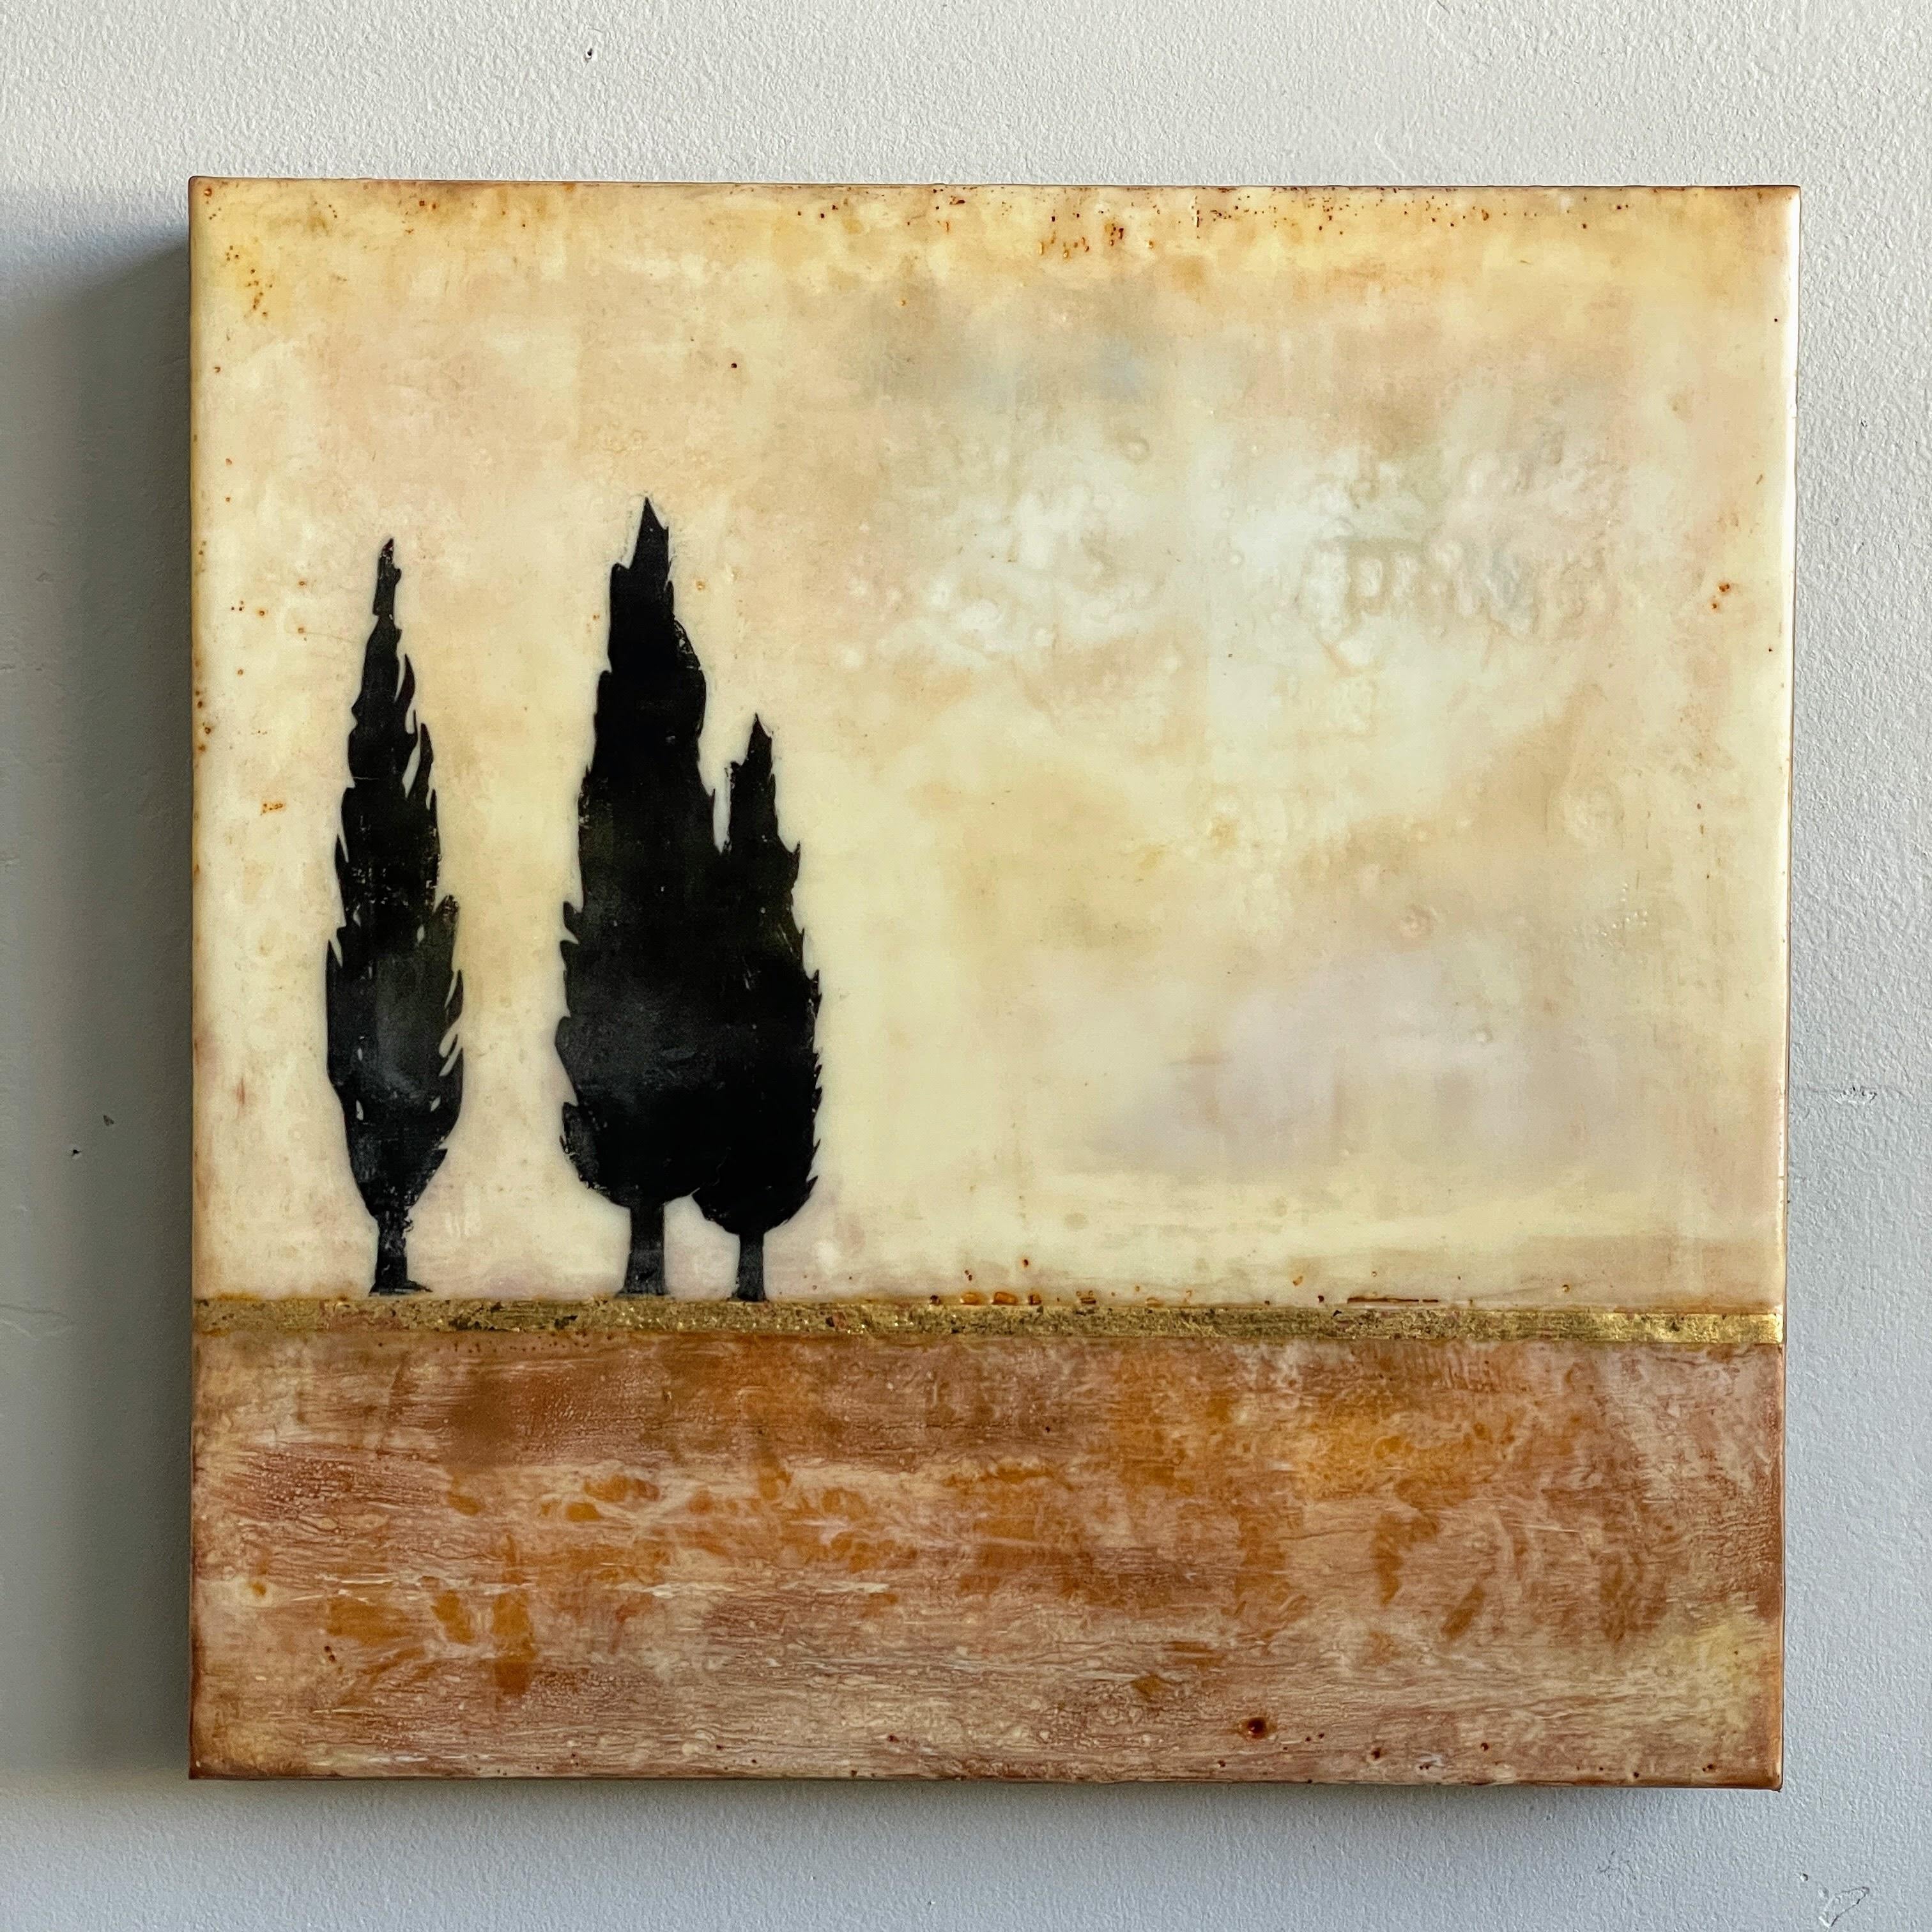 <p>Artist Comments<br>Encaustic artist Shari Lyon shares the love of her creative process and the Tuscan views of Italy. 